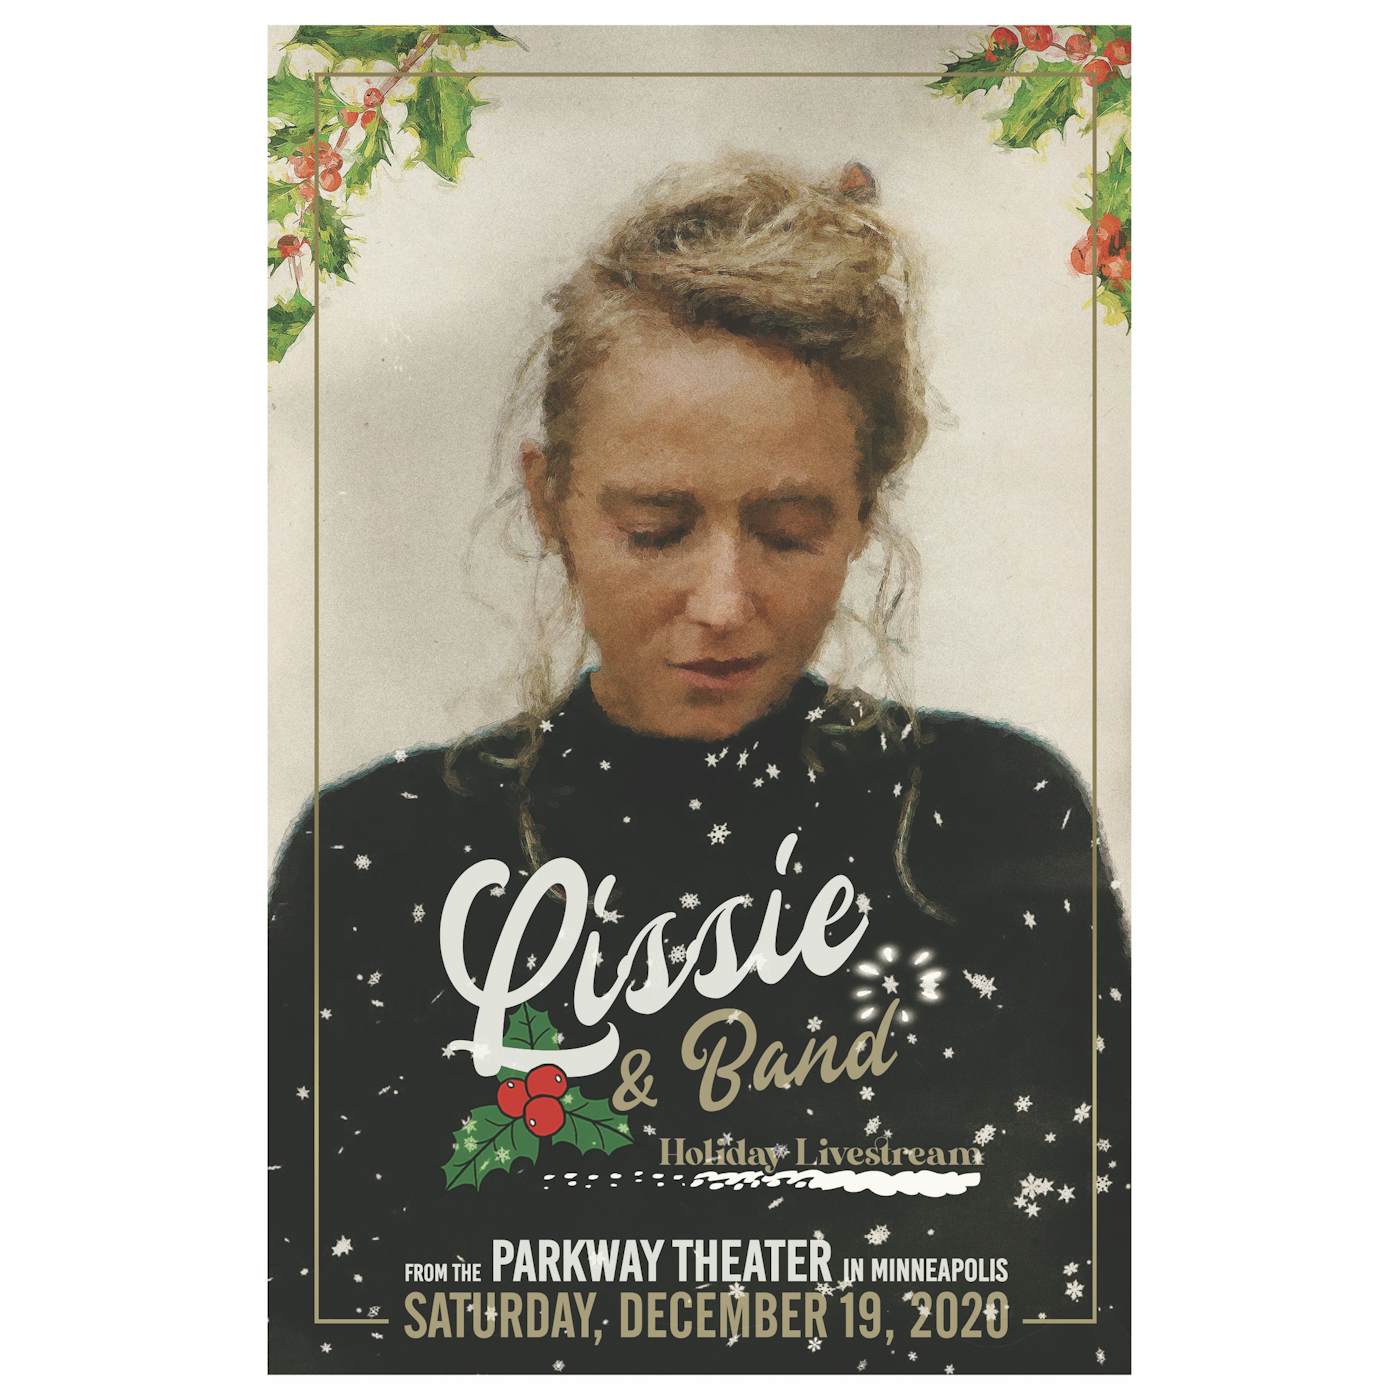 Lissie Holiday Livestream Poster